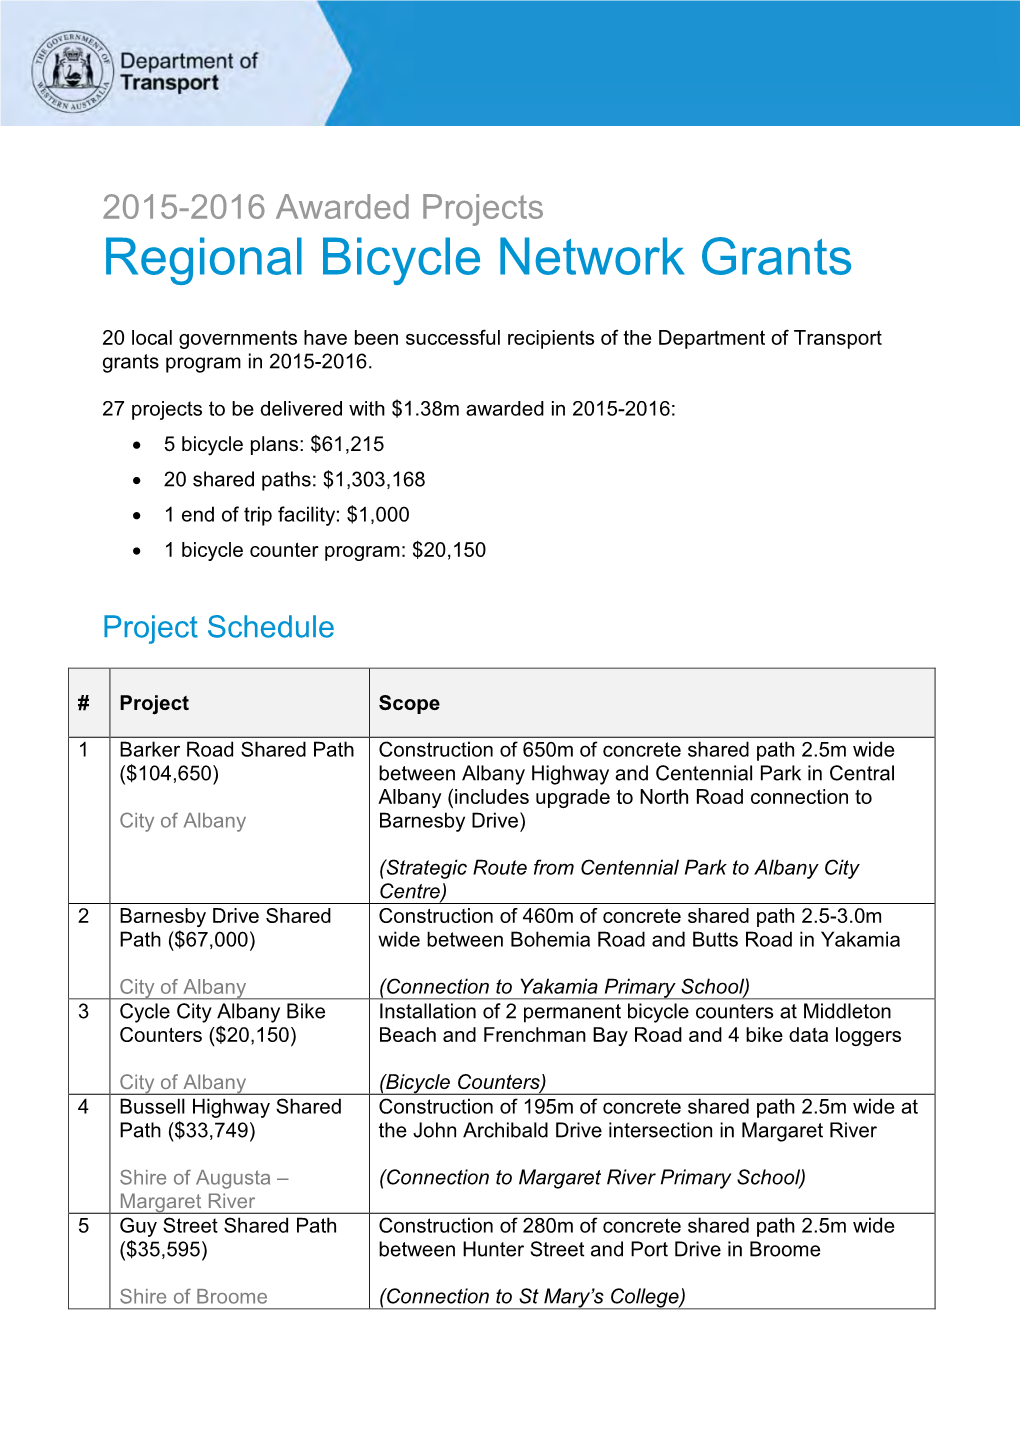 2015-2016 Awarded Projects Regional Bicycle Network Grants